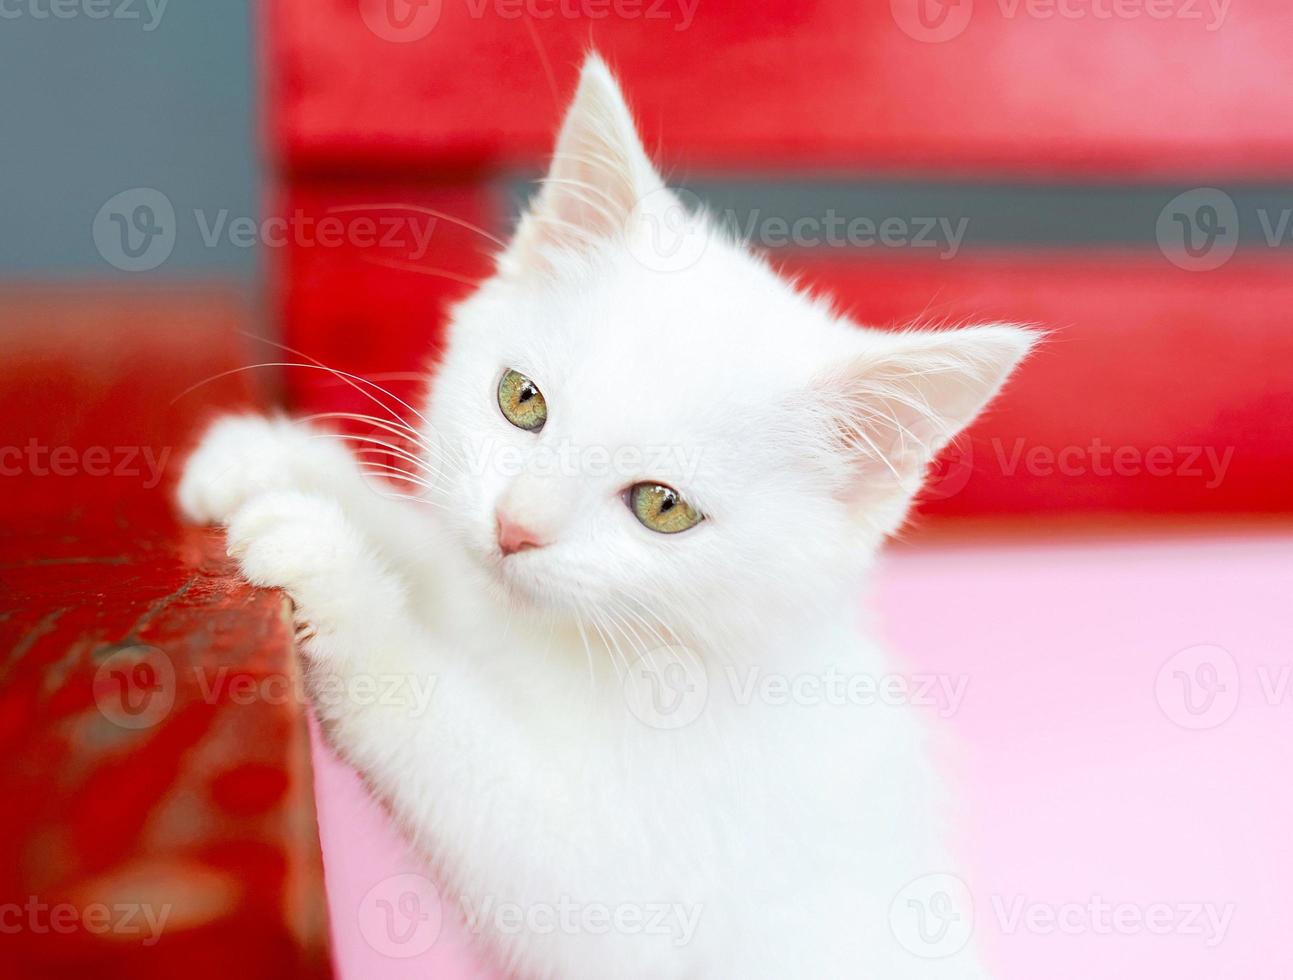 Cute sweet curious white kitty cat on red and pink color background. Friend, pet, allergy, loneliness concept photo